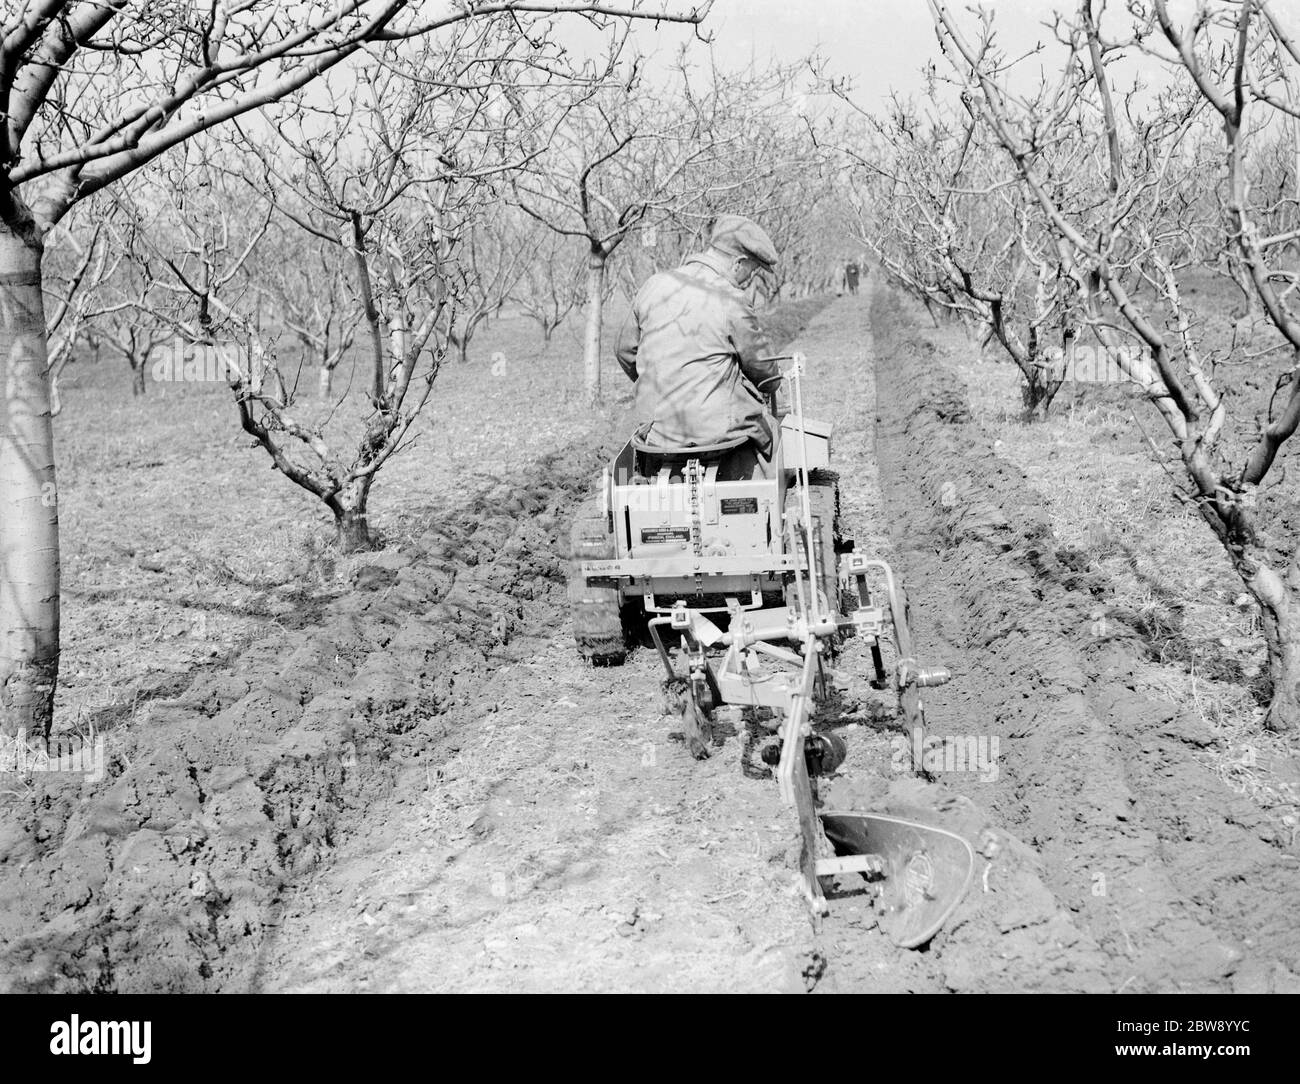 The Ransomes from Ipswich demonstrate their MG2 Motor Garden Cultivator in East Malling , Kent . 22 March 1939. Stock Photo